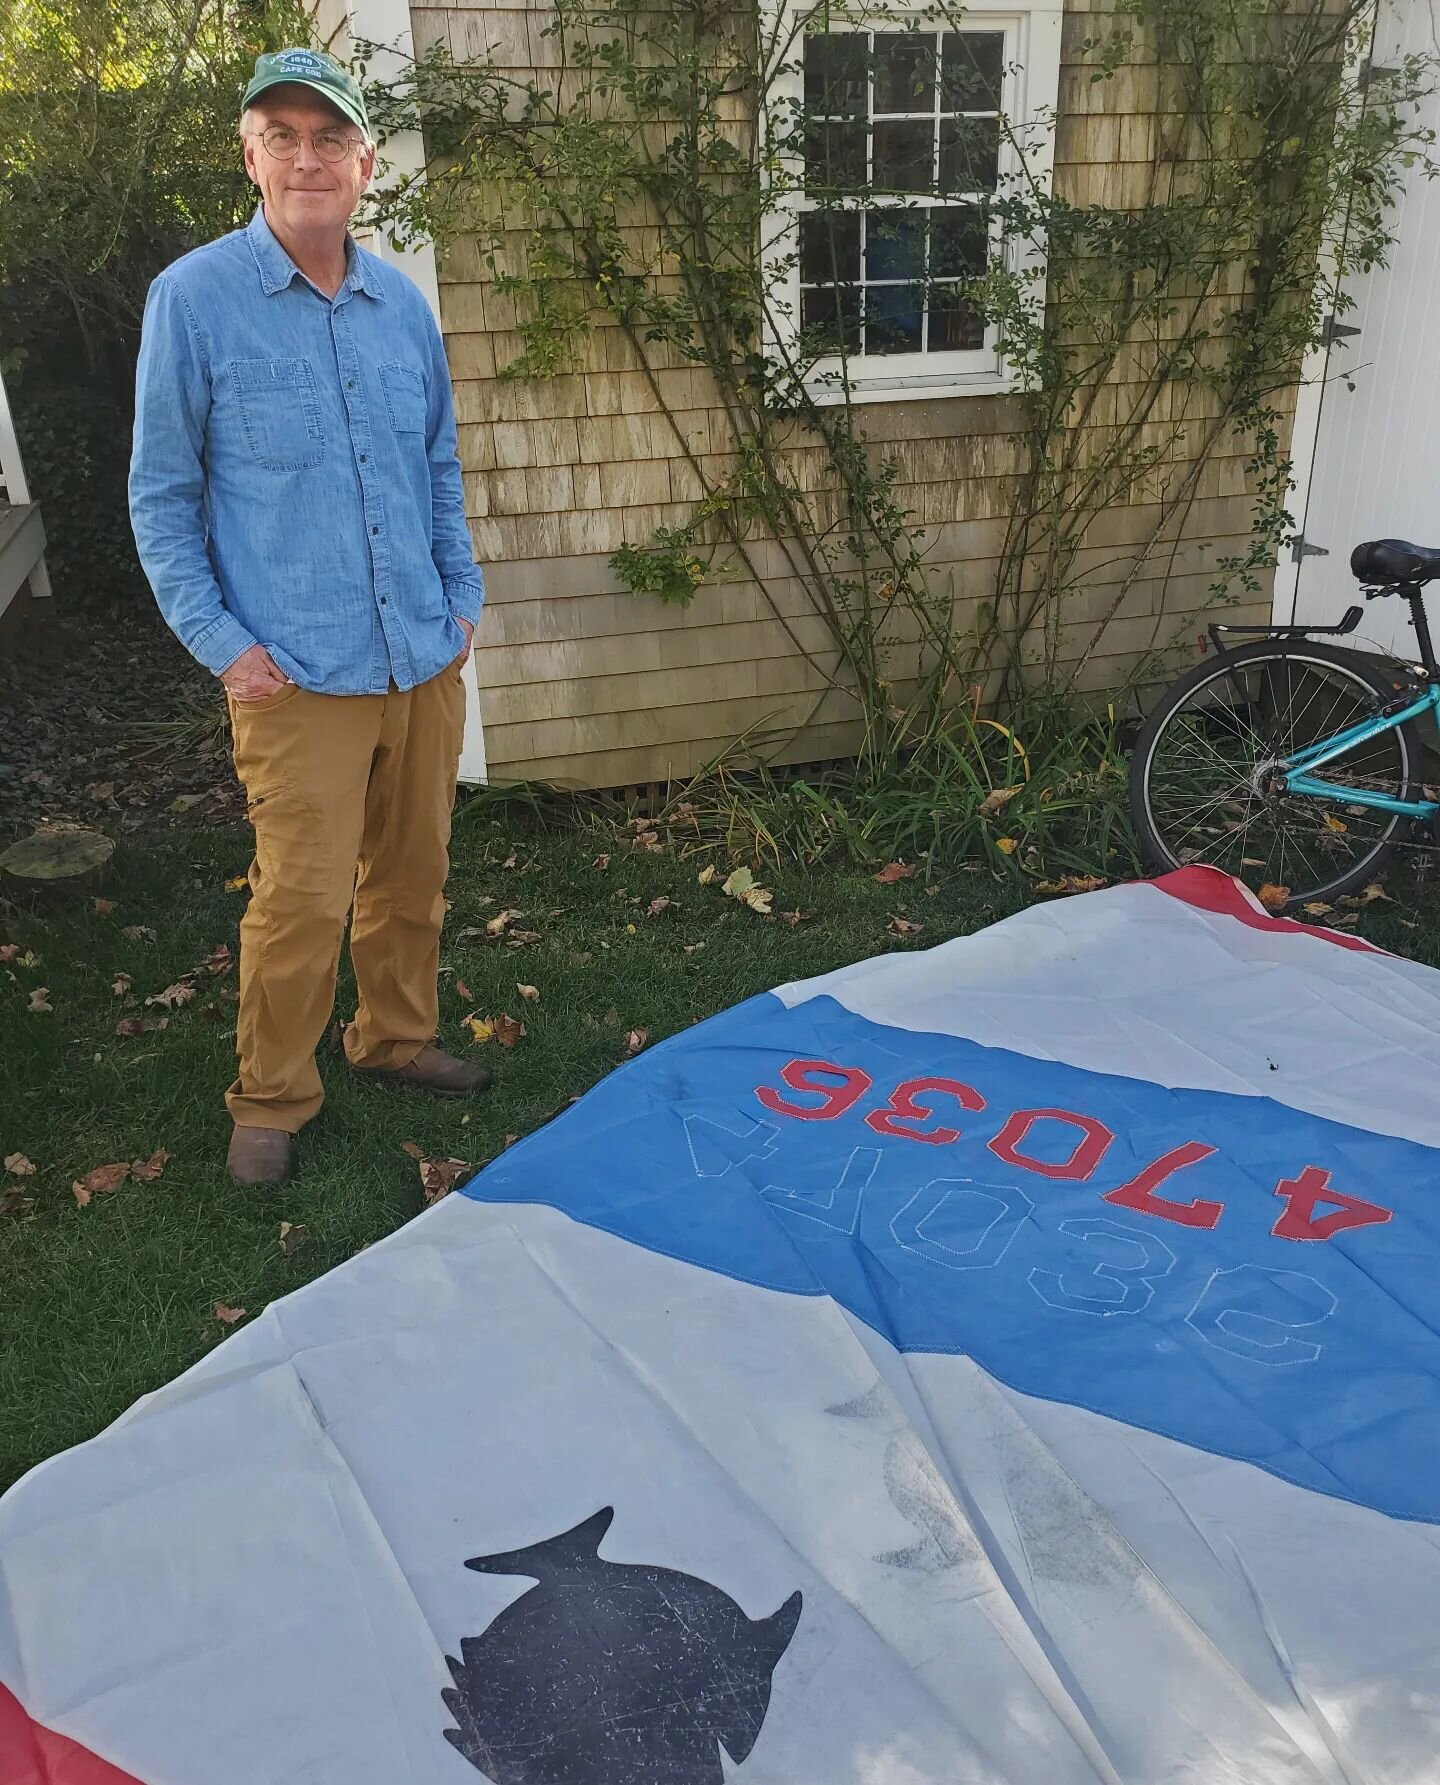 Found in the shed: the sail with which I won the 1978 Sunfish North Americans. Read about it in my sailing memoir SECOND WIND. #secondwind #sunfishsailing